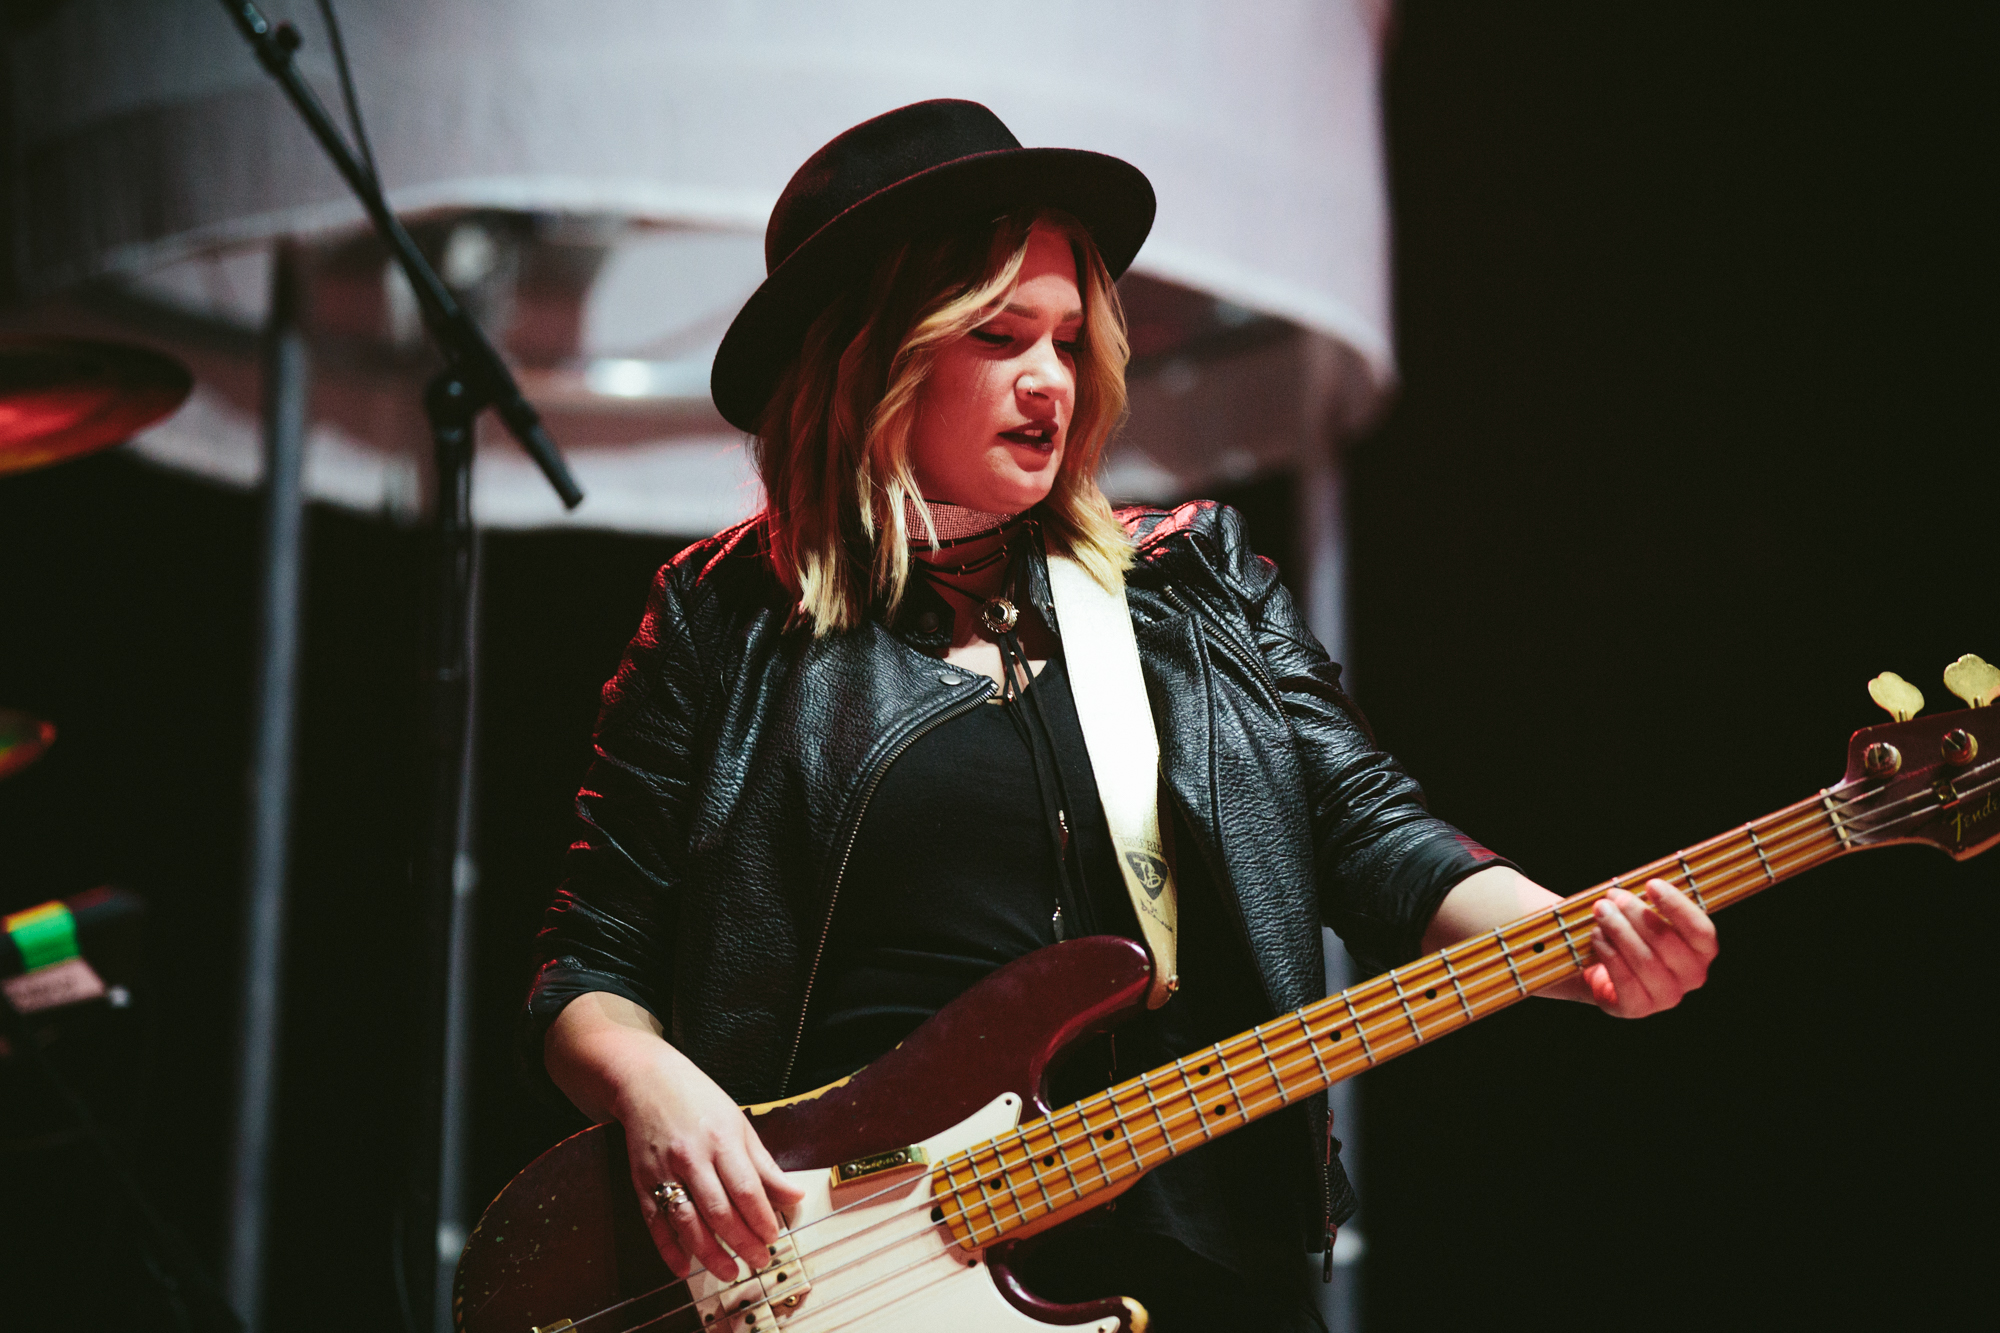 Abbi Roth playing bass on stage